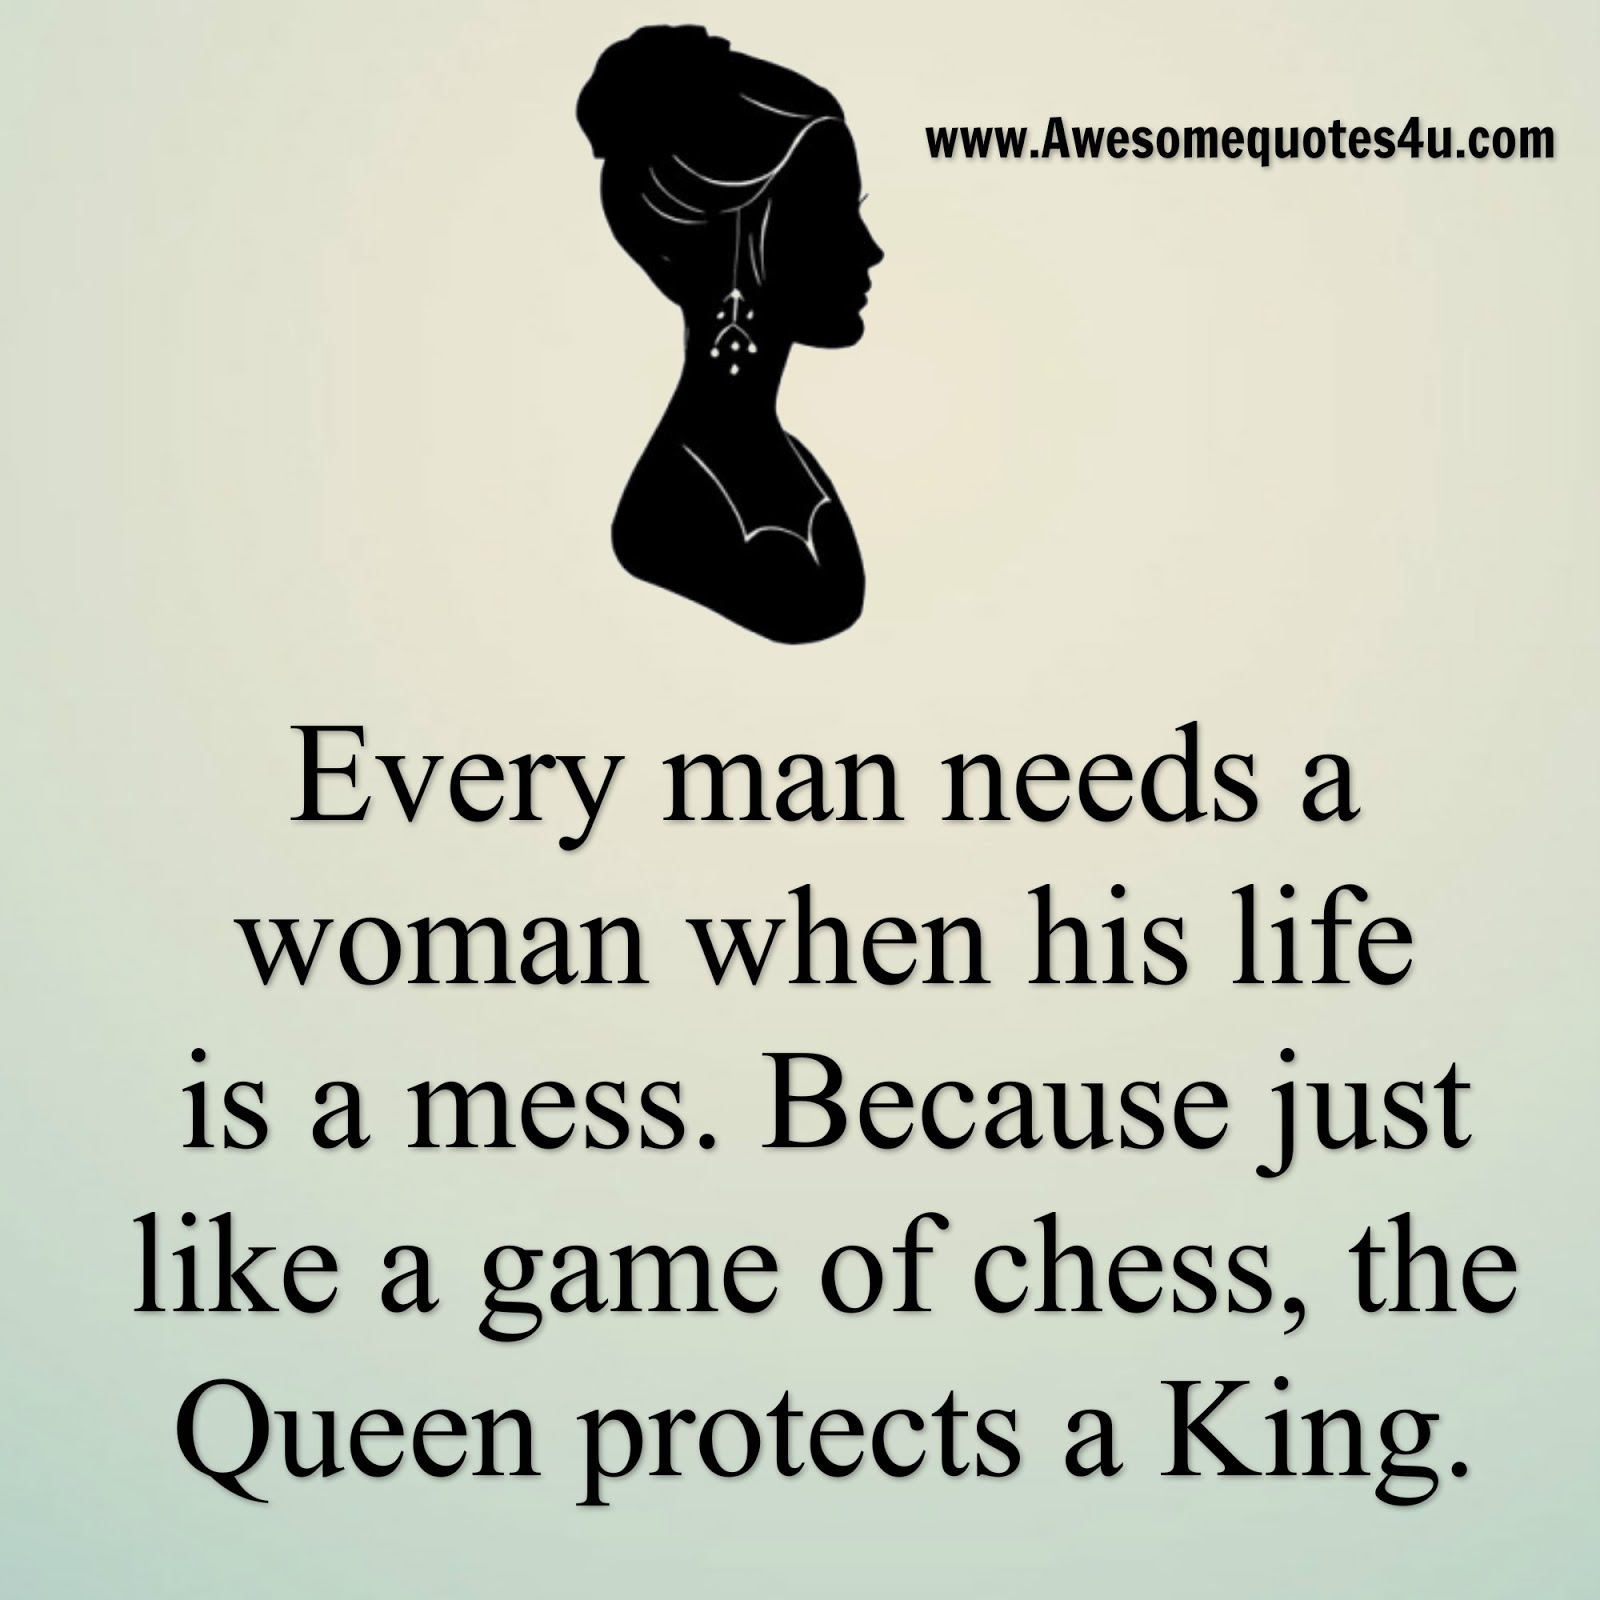 Woman need man. Every man needs a woman when his Life is a mess. Every King needs a Queen. Every King needs his Crown. Protect the Queen игра.